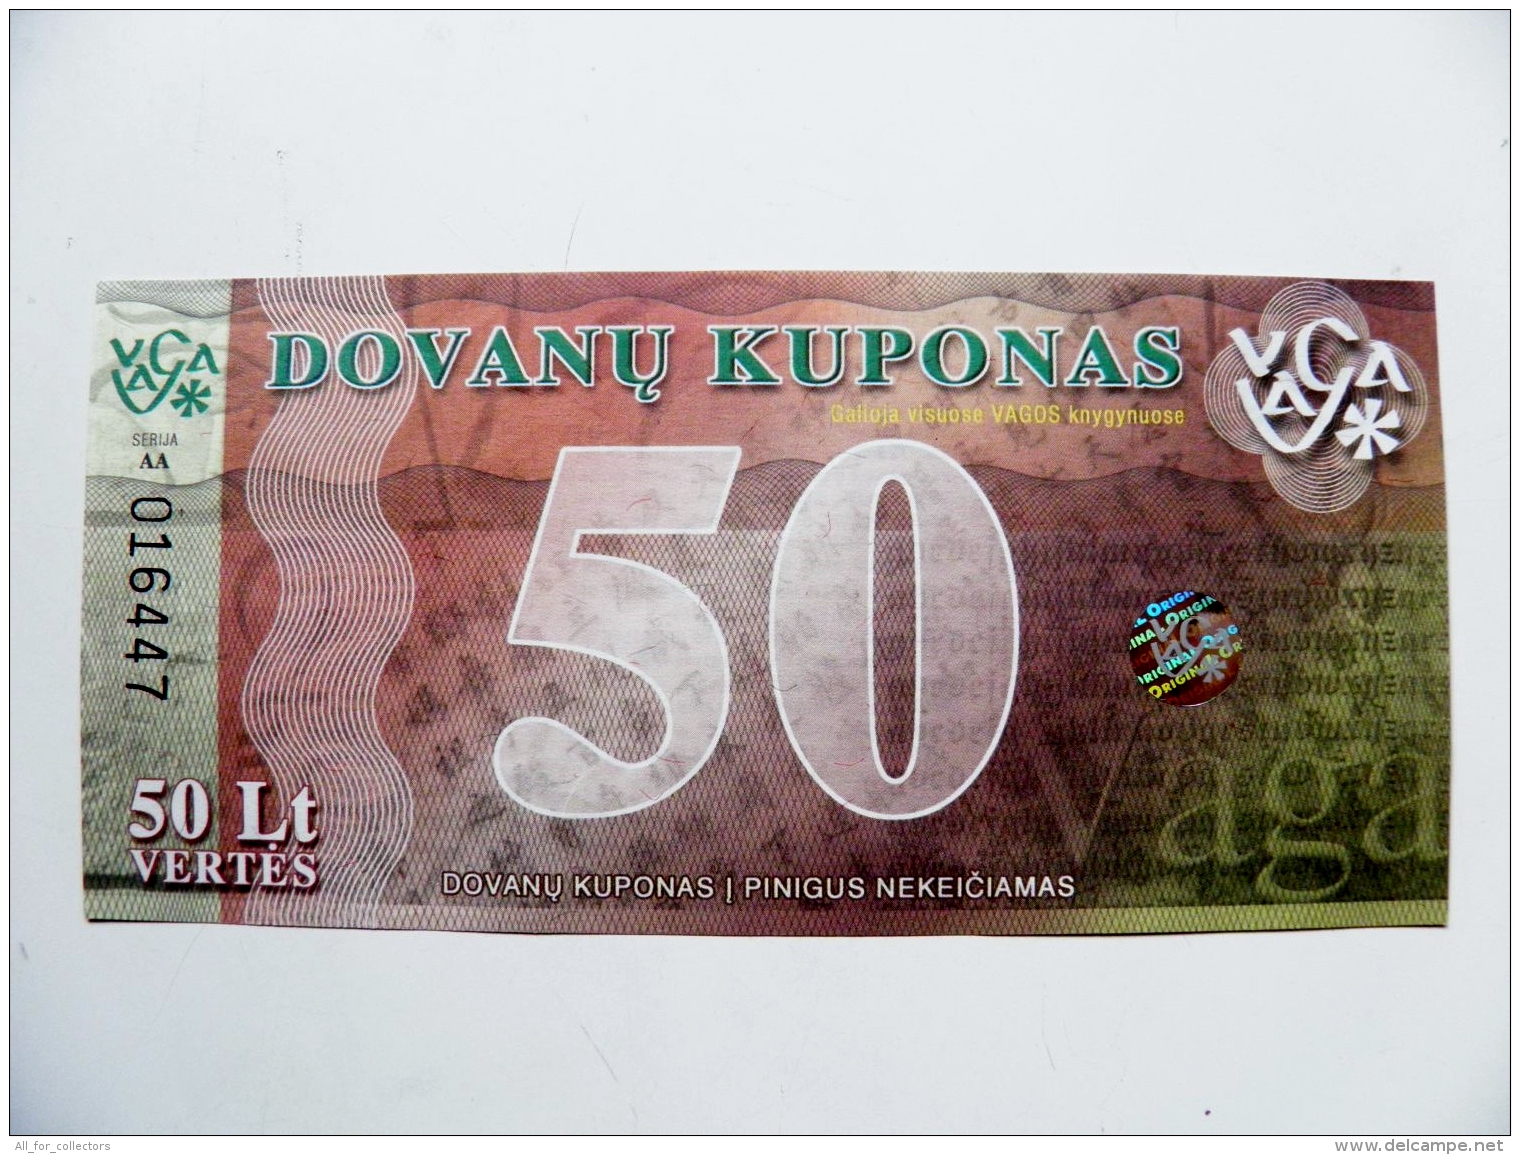 Uns Banknote From Lithuania 2008 50 Lt. Gift Voucher At The Bookstore Hologram Vaga - Litauen